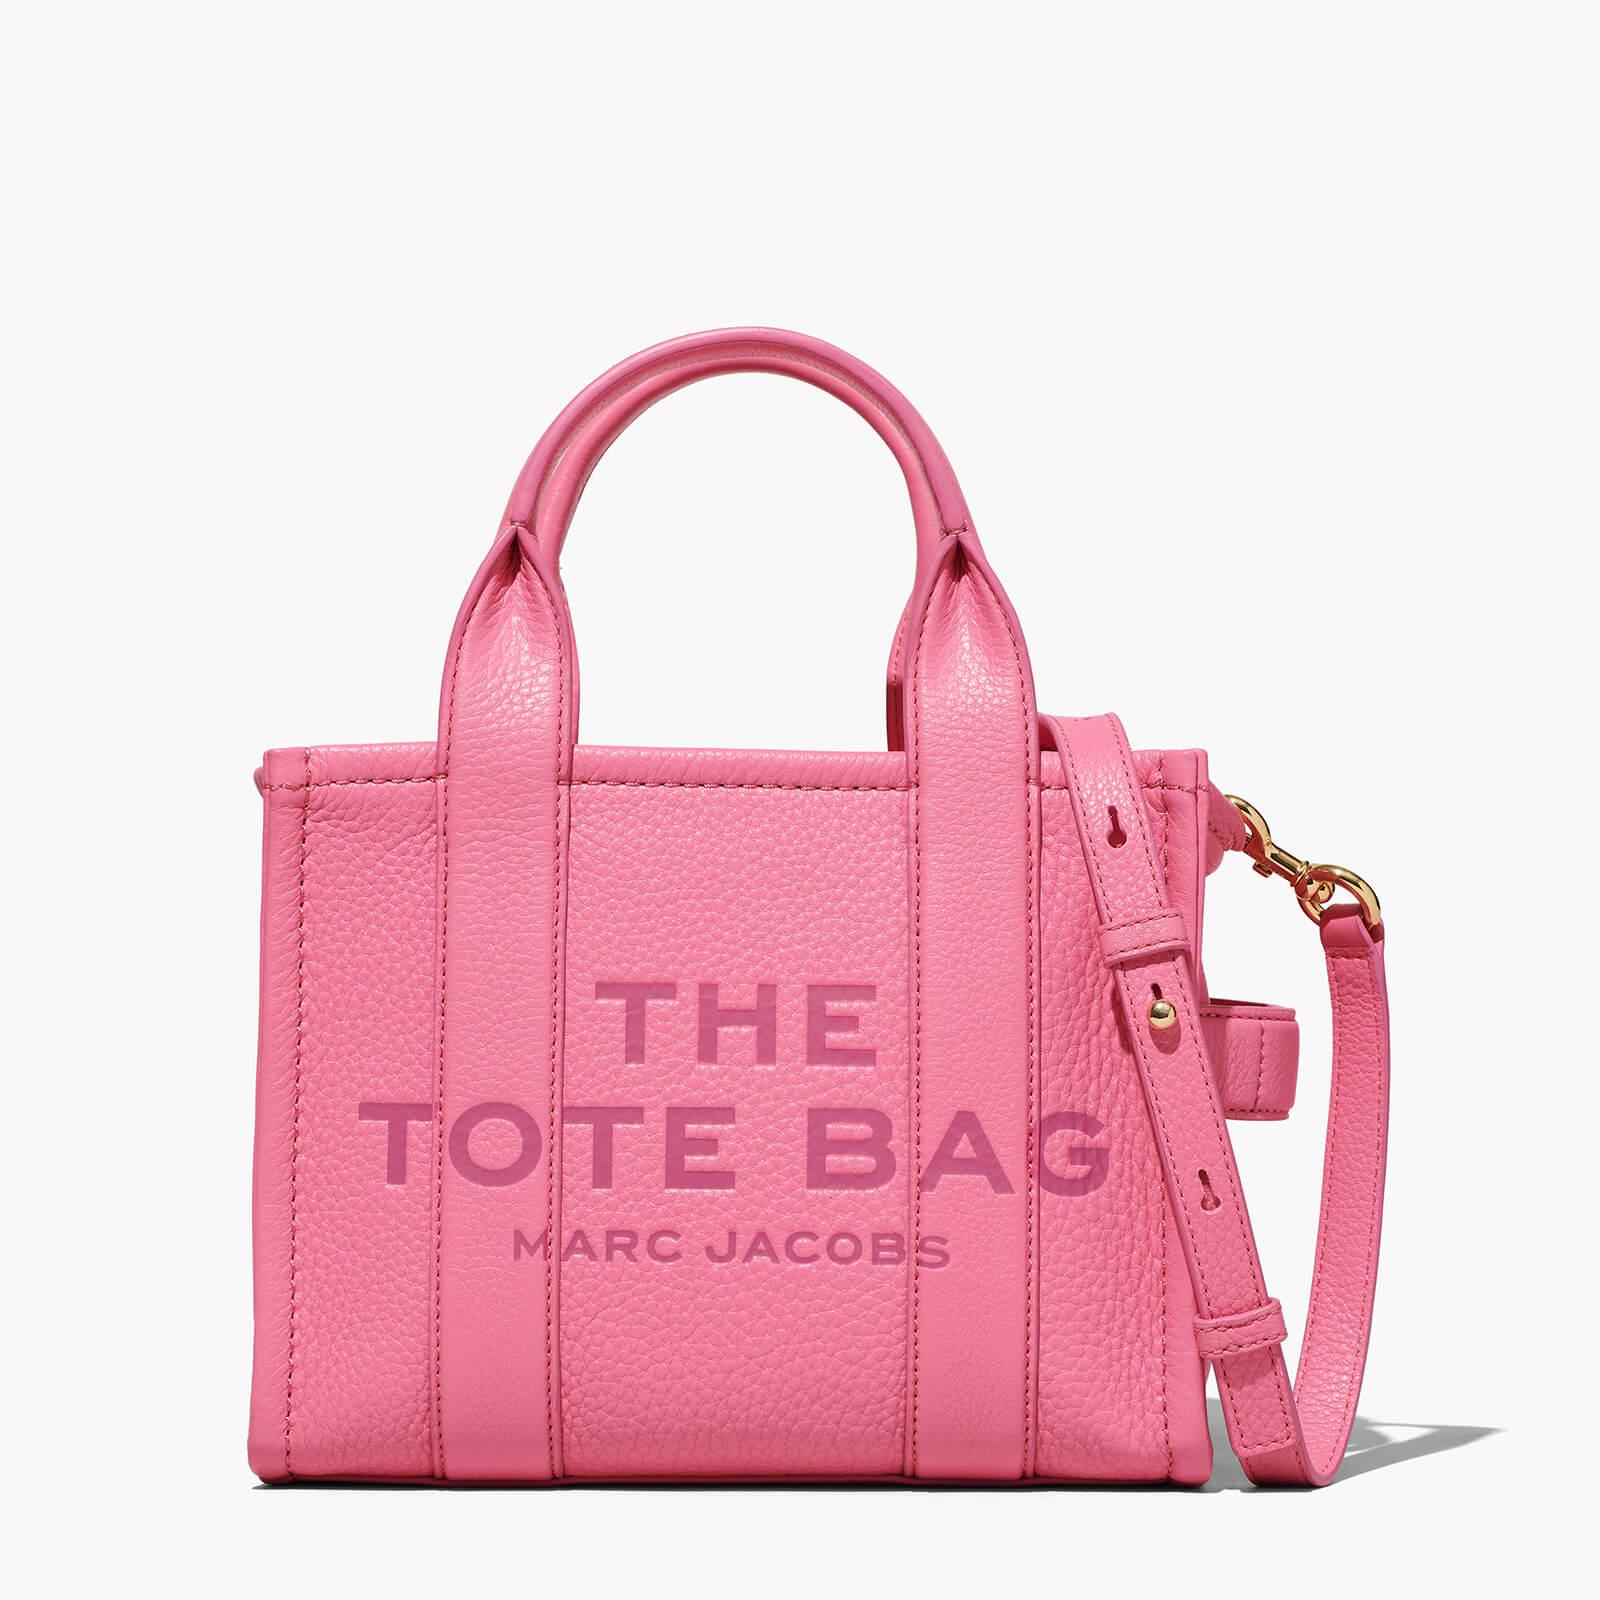 marc jacobs the tote bag mini leather